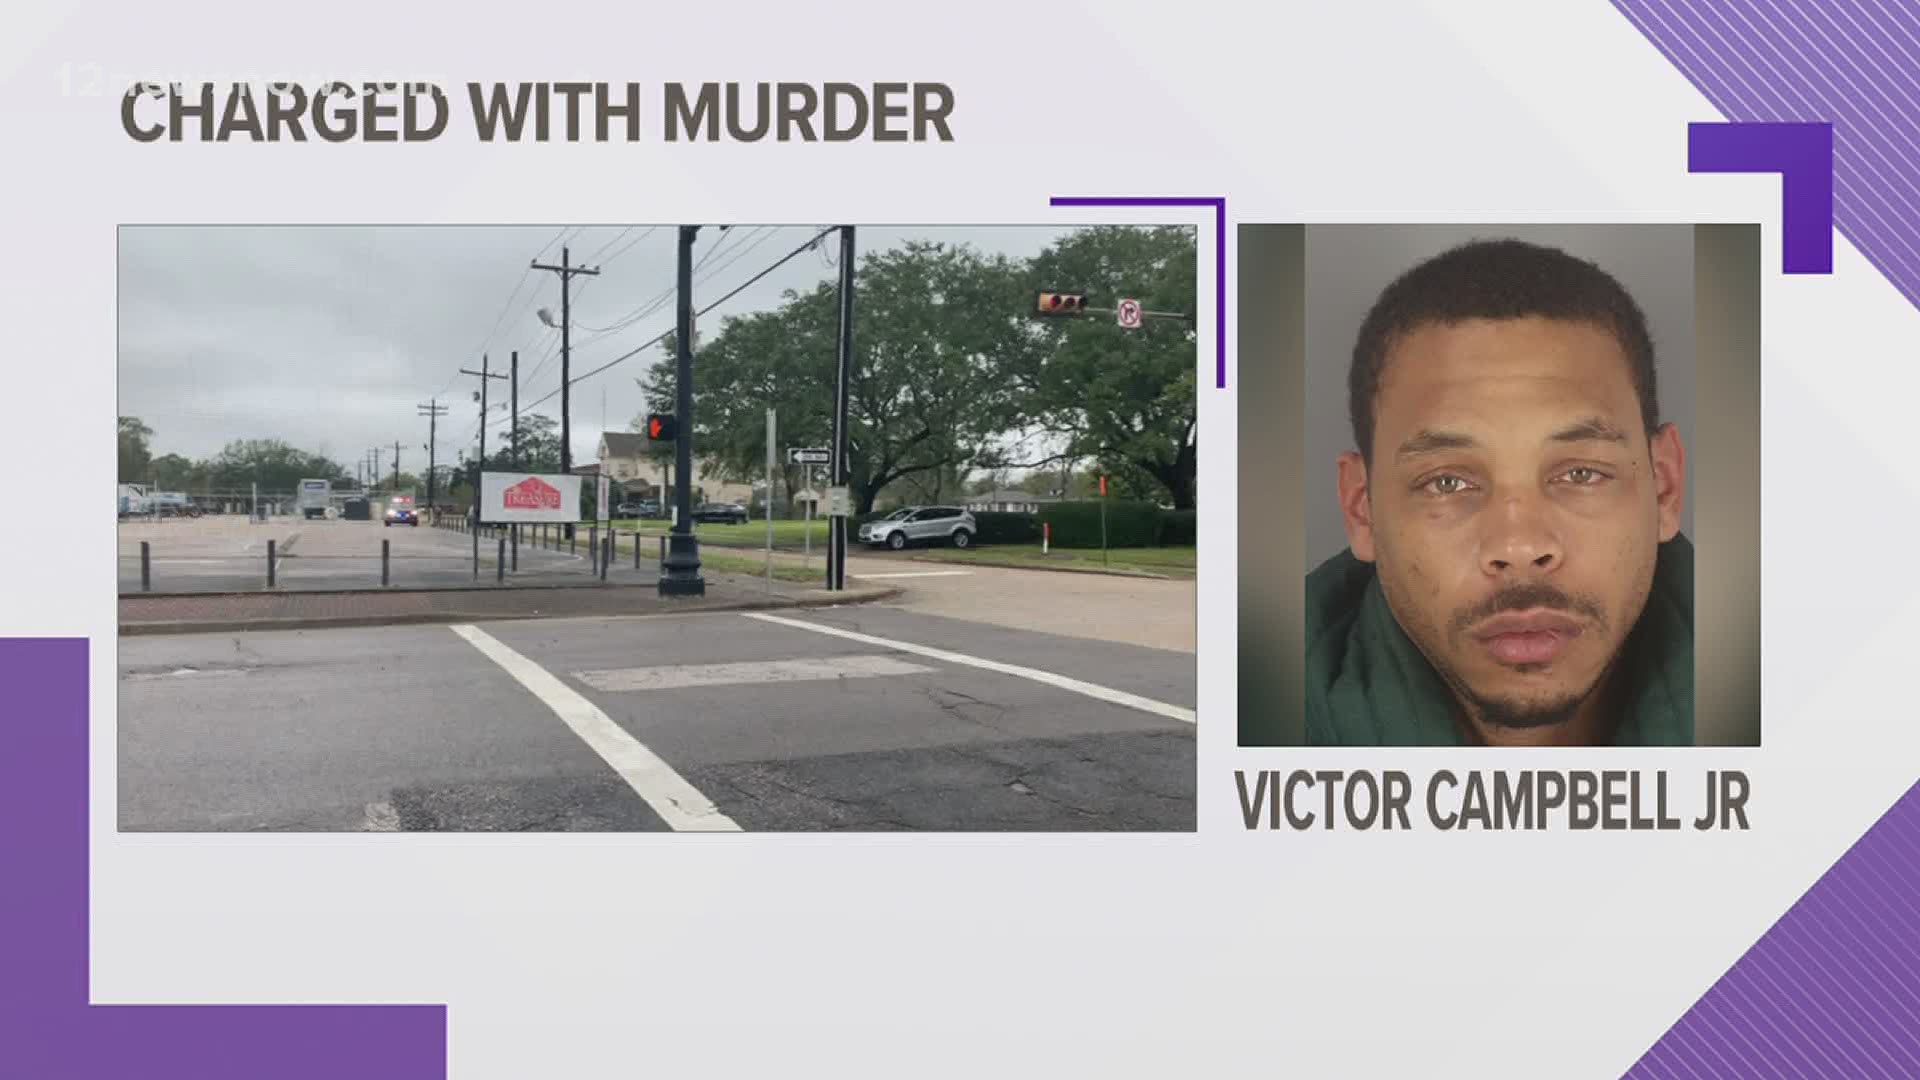 Victor Campbell is accused of leading police on a chase before crashing the car in downtown Beaumont